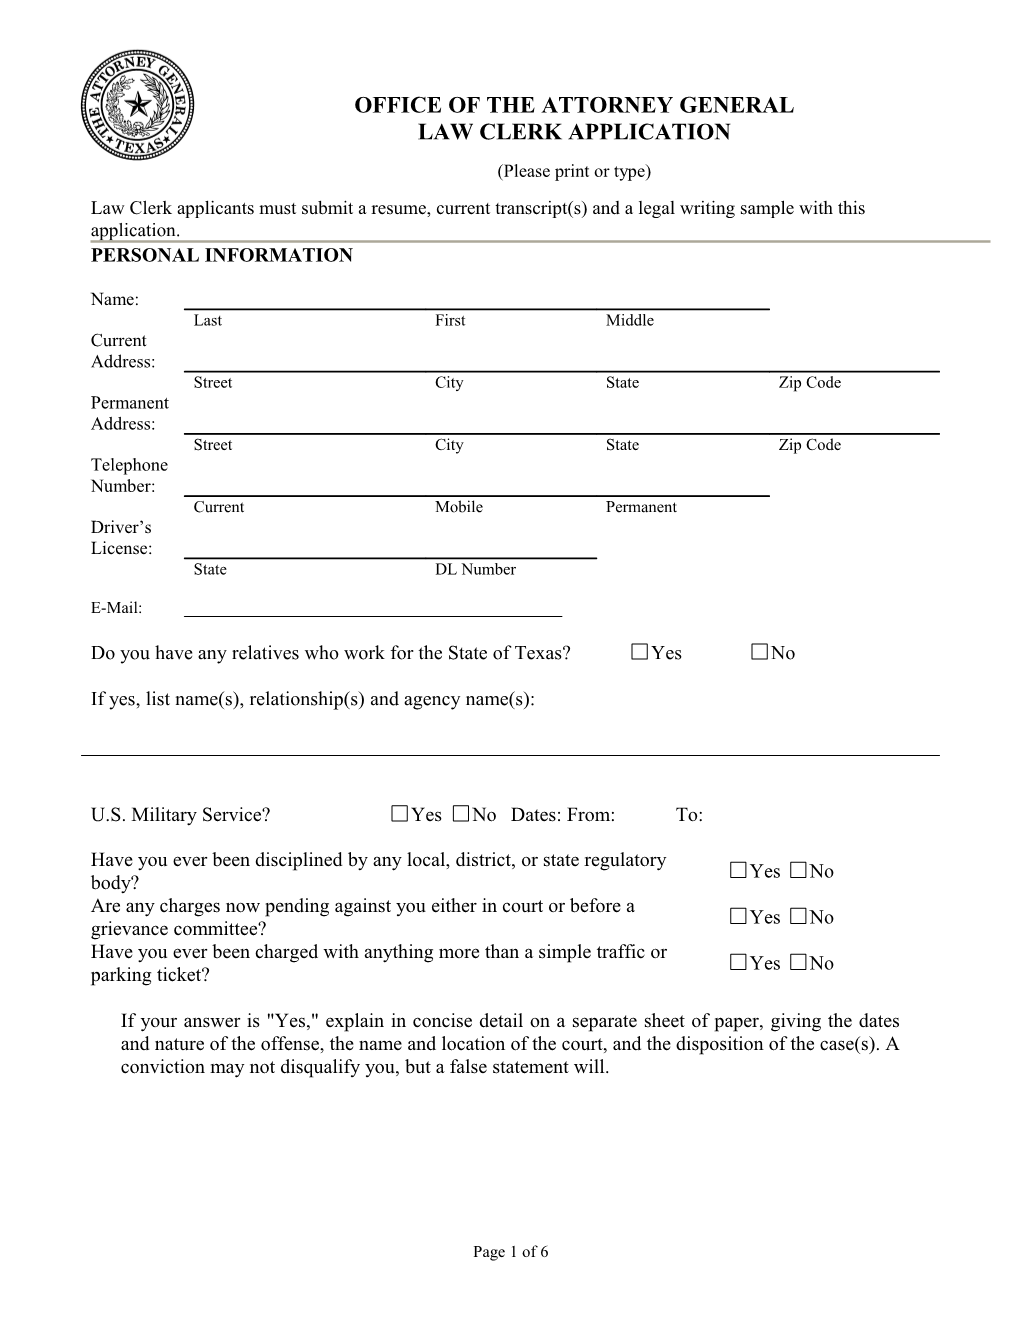 Office of the Attorney General Law Clerk Application